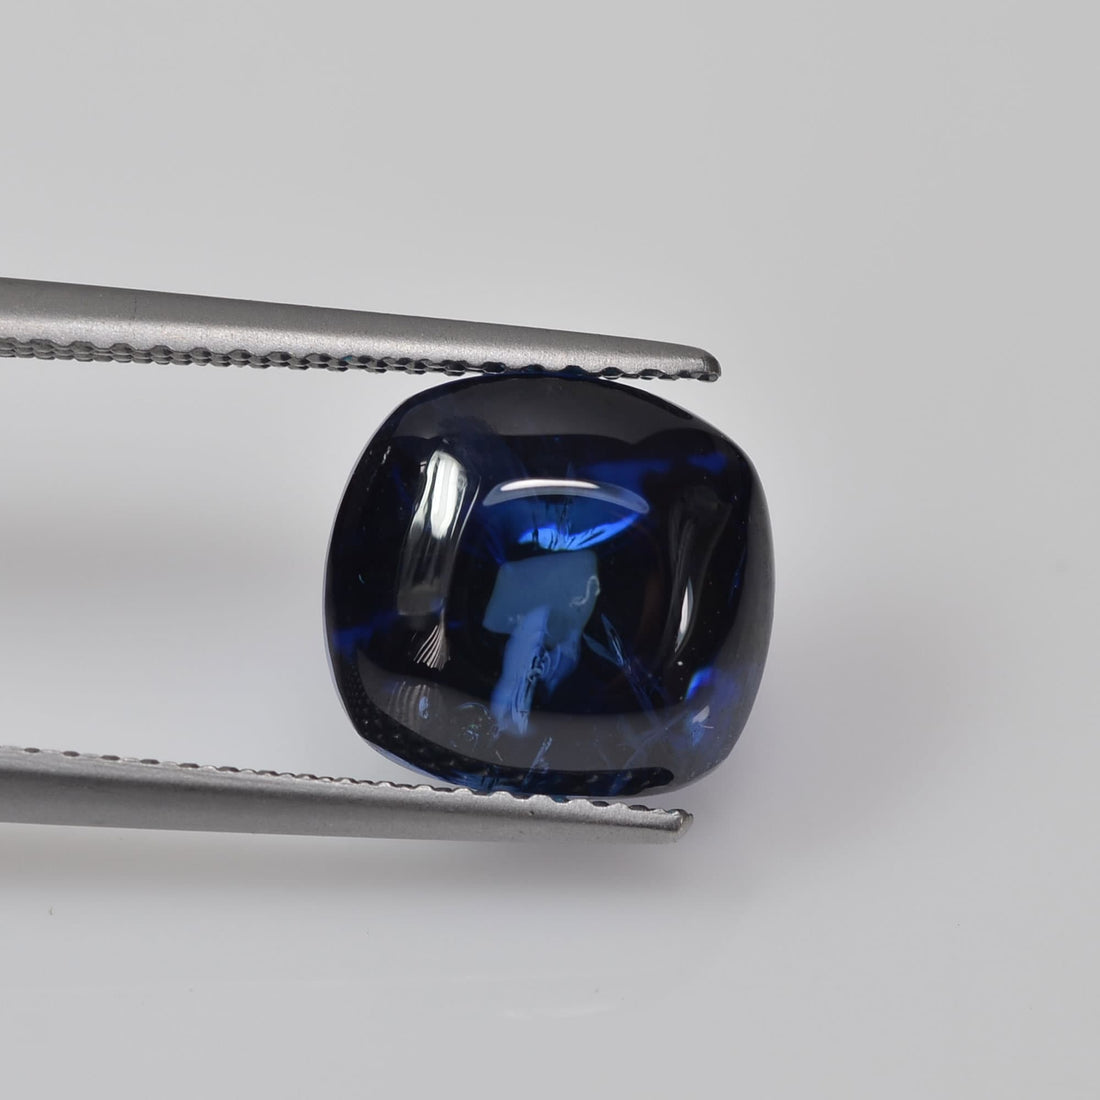 7.73 cts Natural Blue Sapphire Loose Gemstone Cabochon Cushion Cut Certified